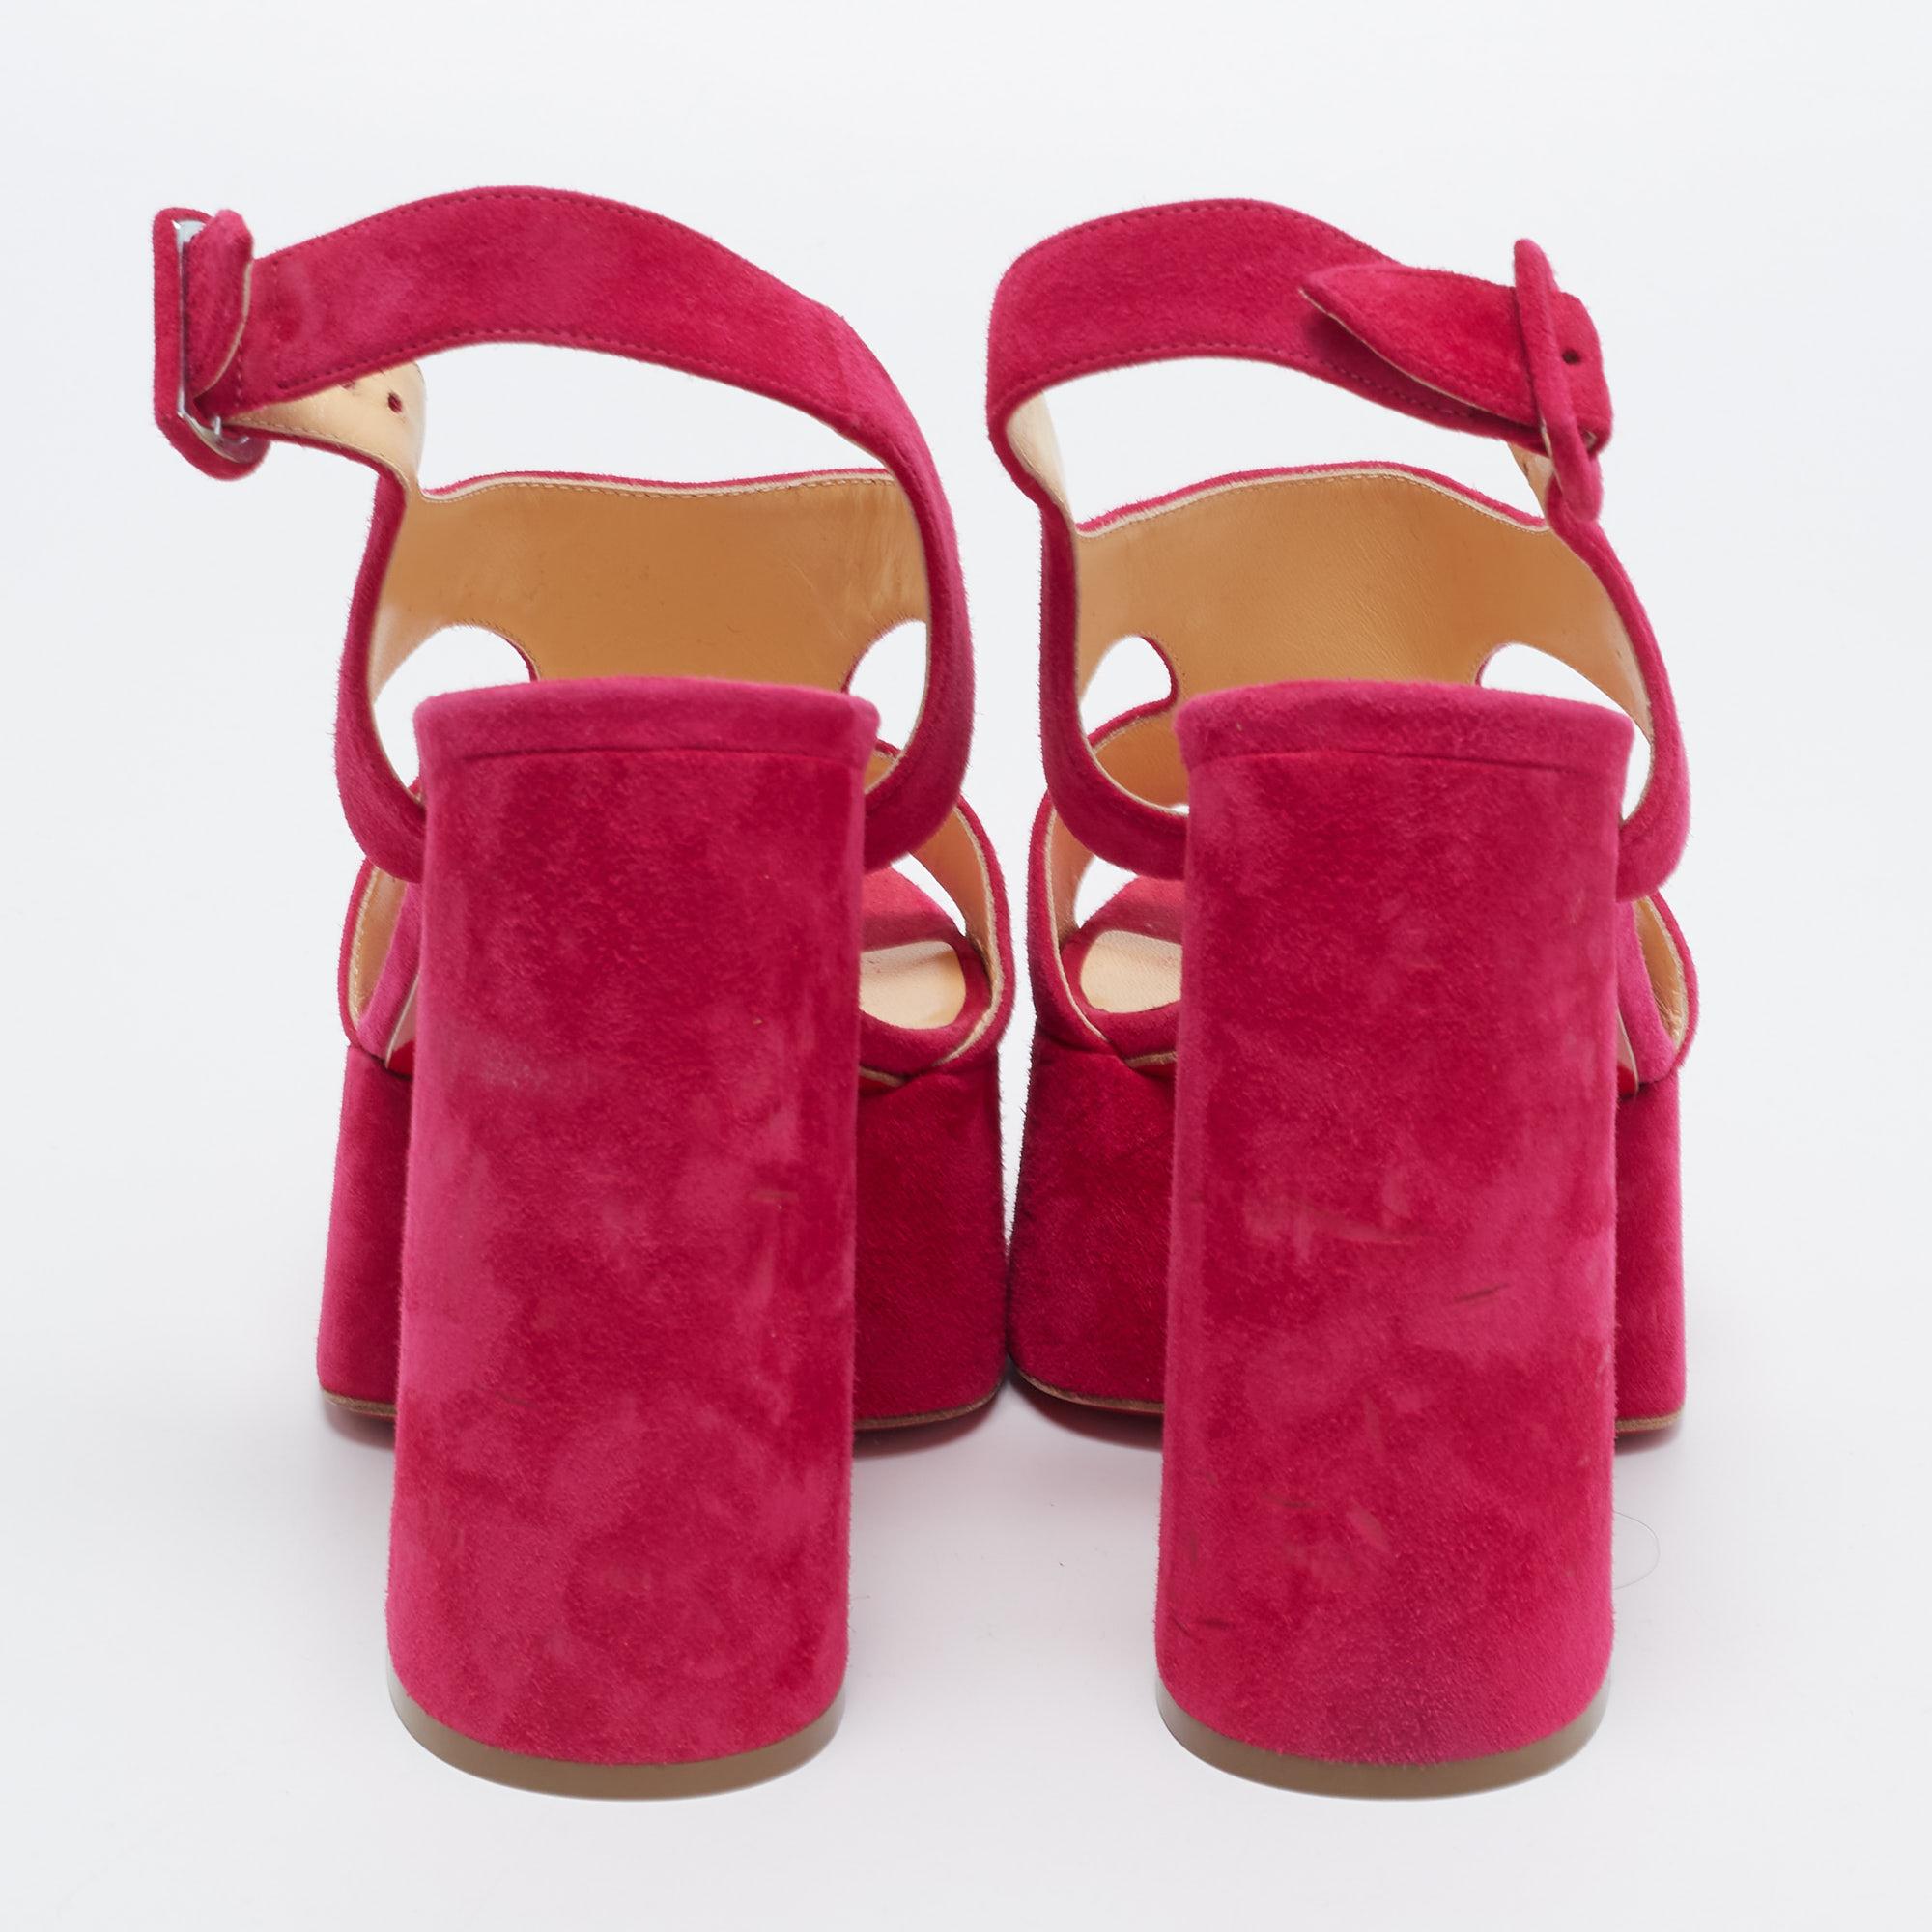 We love how the pink brings out the best of the shoe's design. These suede sandals by Christian Louboutin feature open toes, ankle strap closure, platforms, and block heels. Make these yours today!

